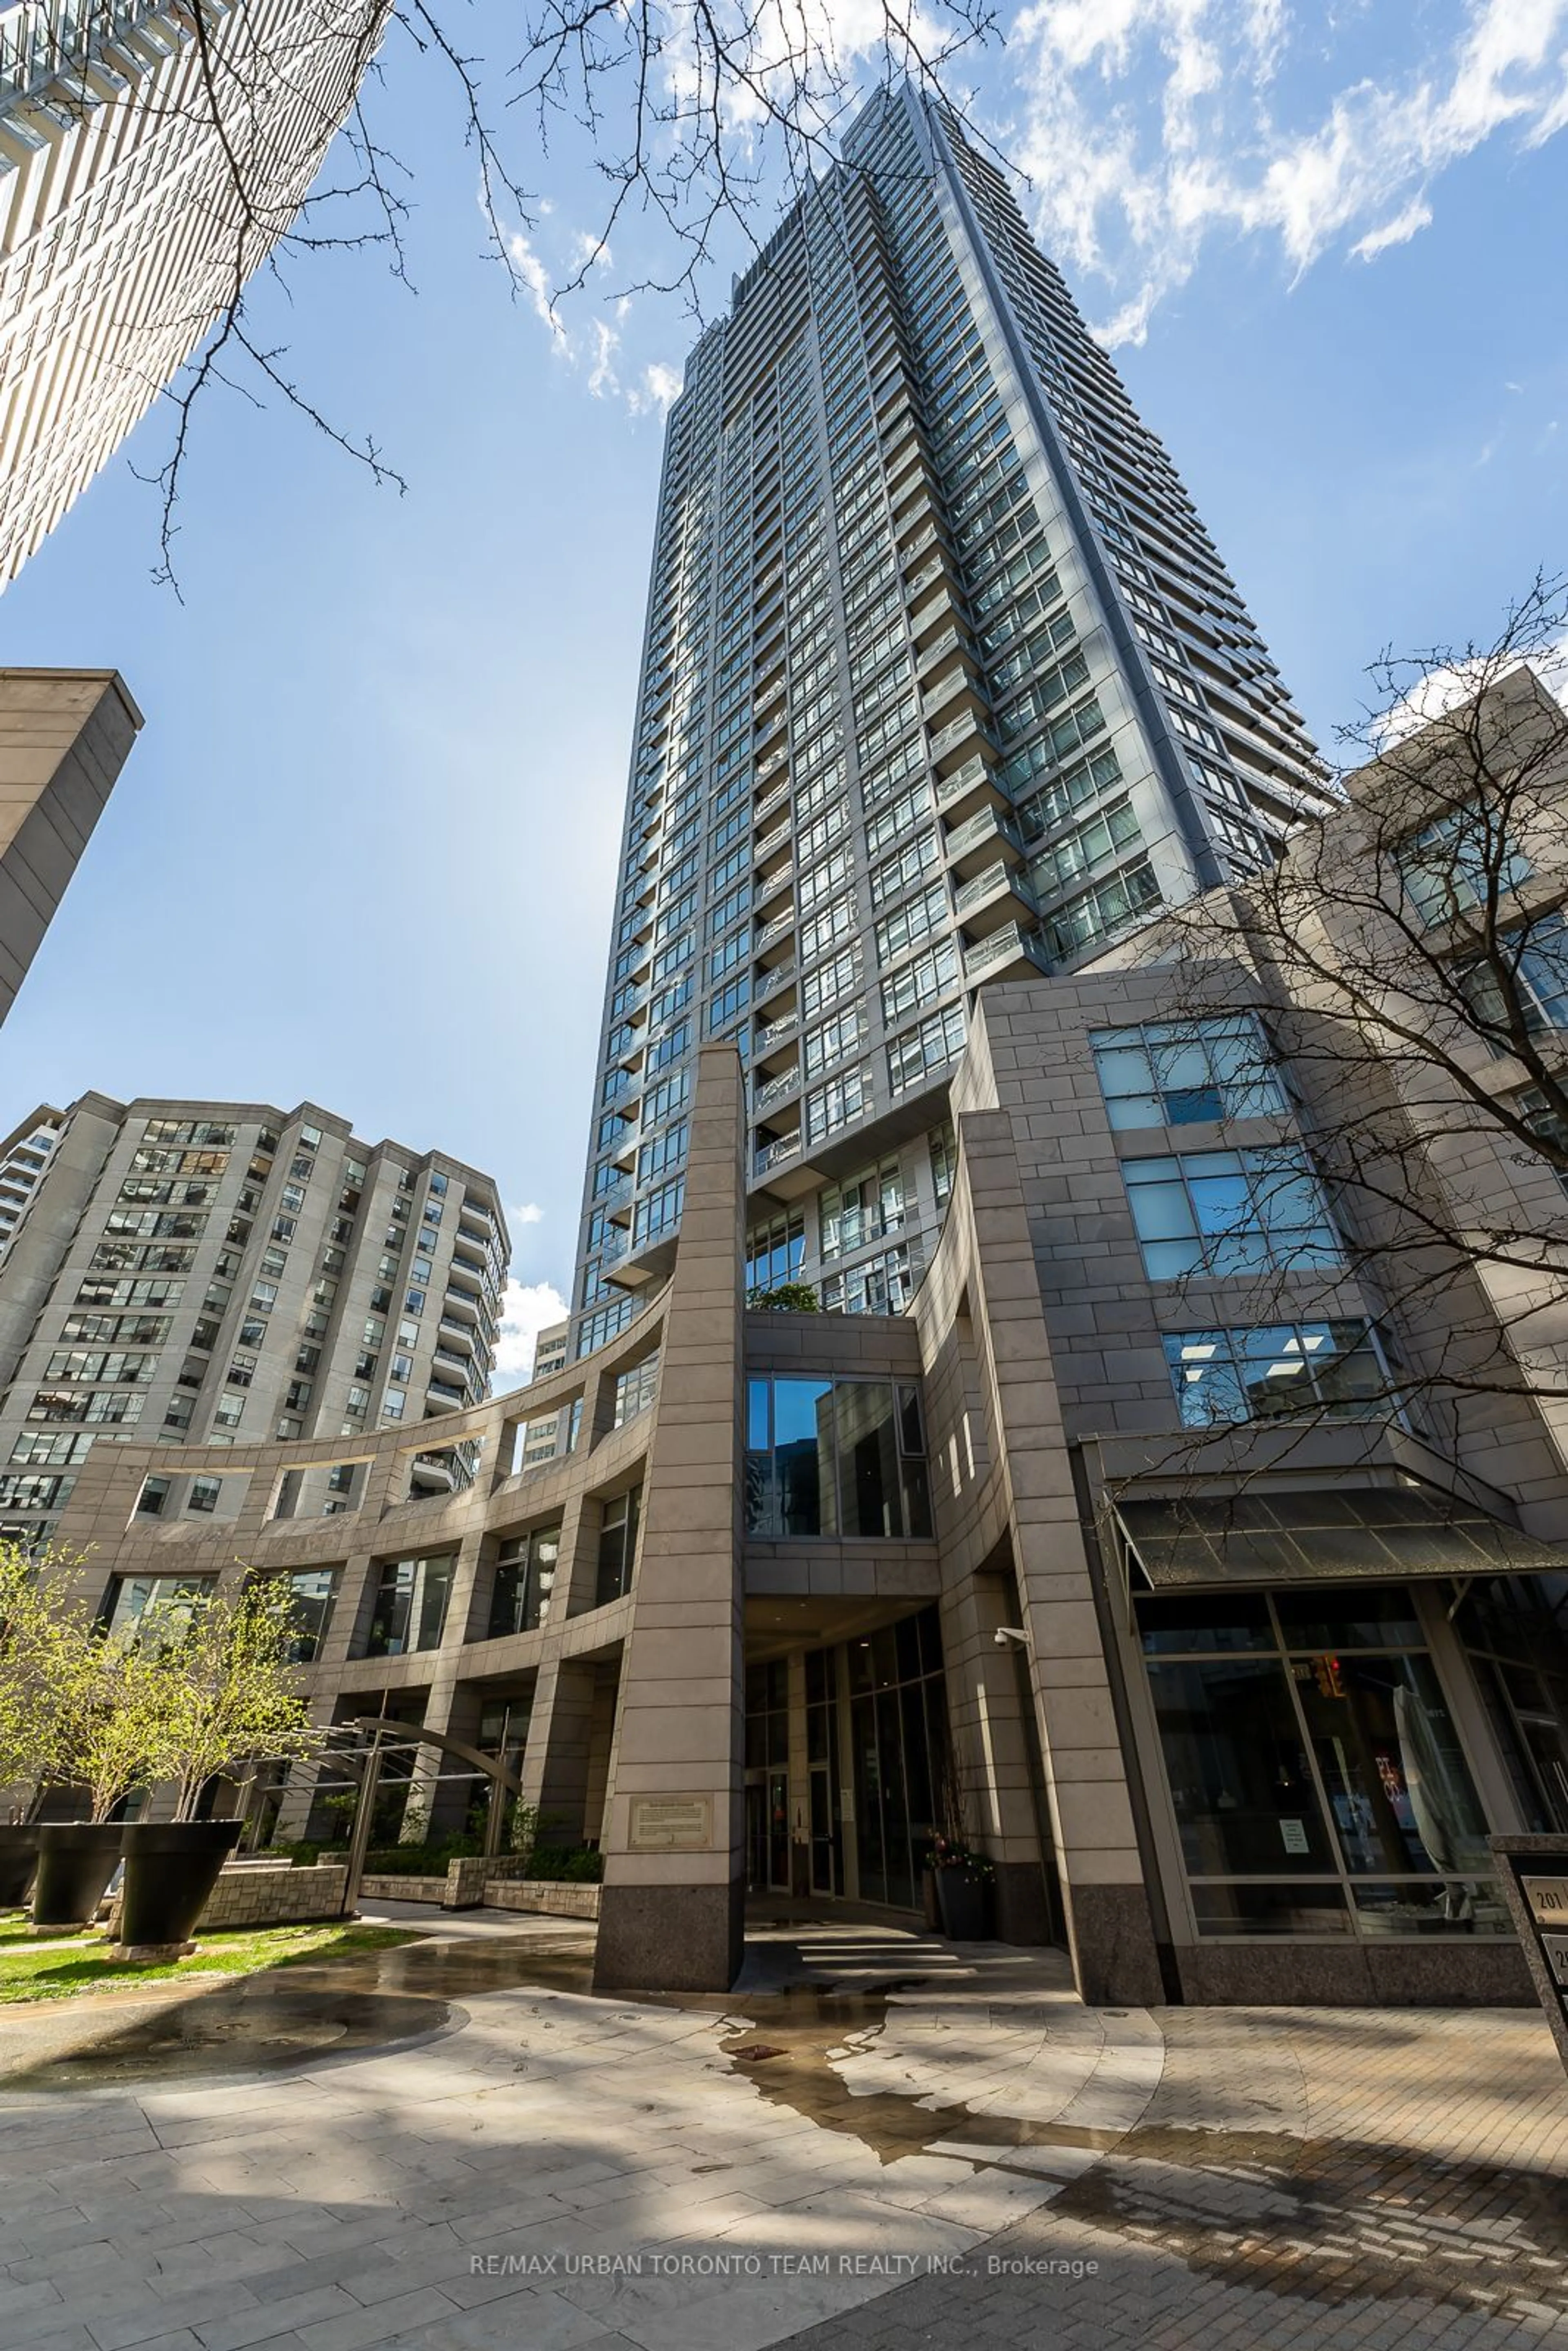 A pic from exterior of the house or condo for 2181 Yonge St #2903, Toronto Ontario M4S 3H7